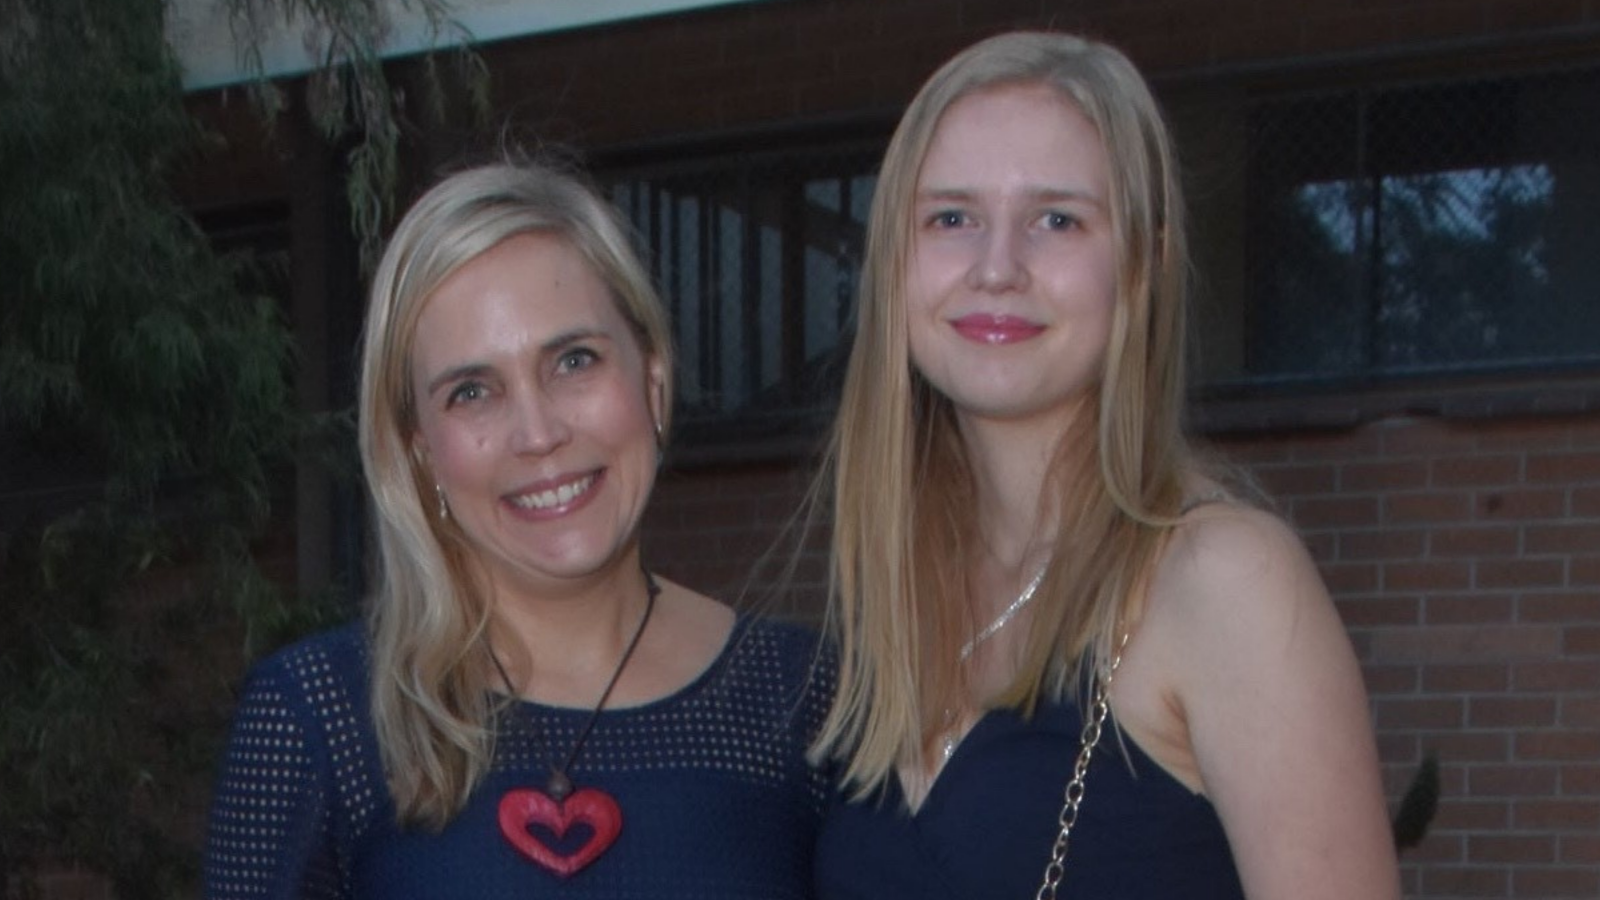 two blonde women who look similar with formal clothes on